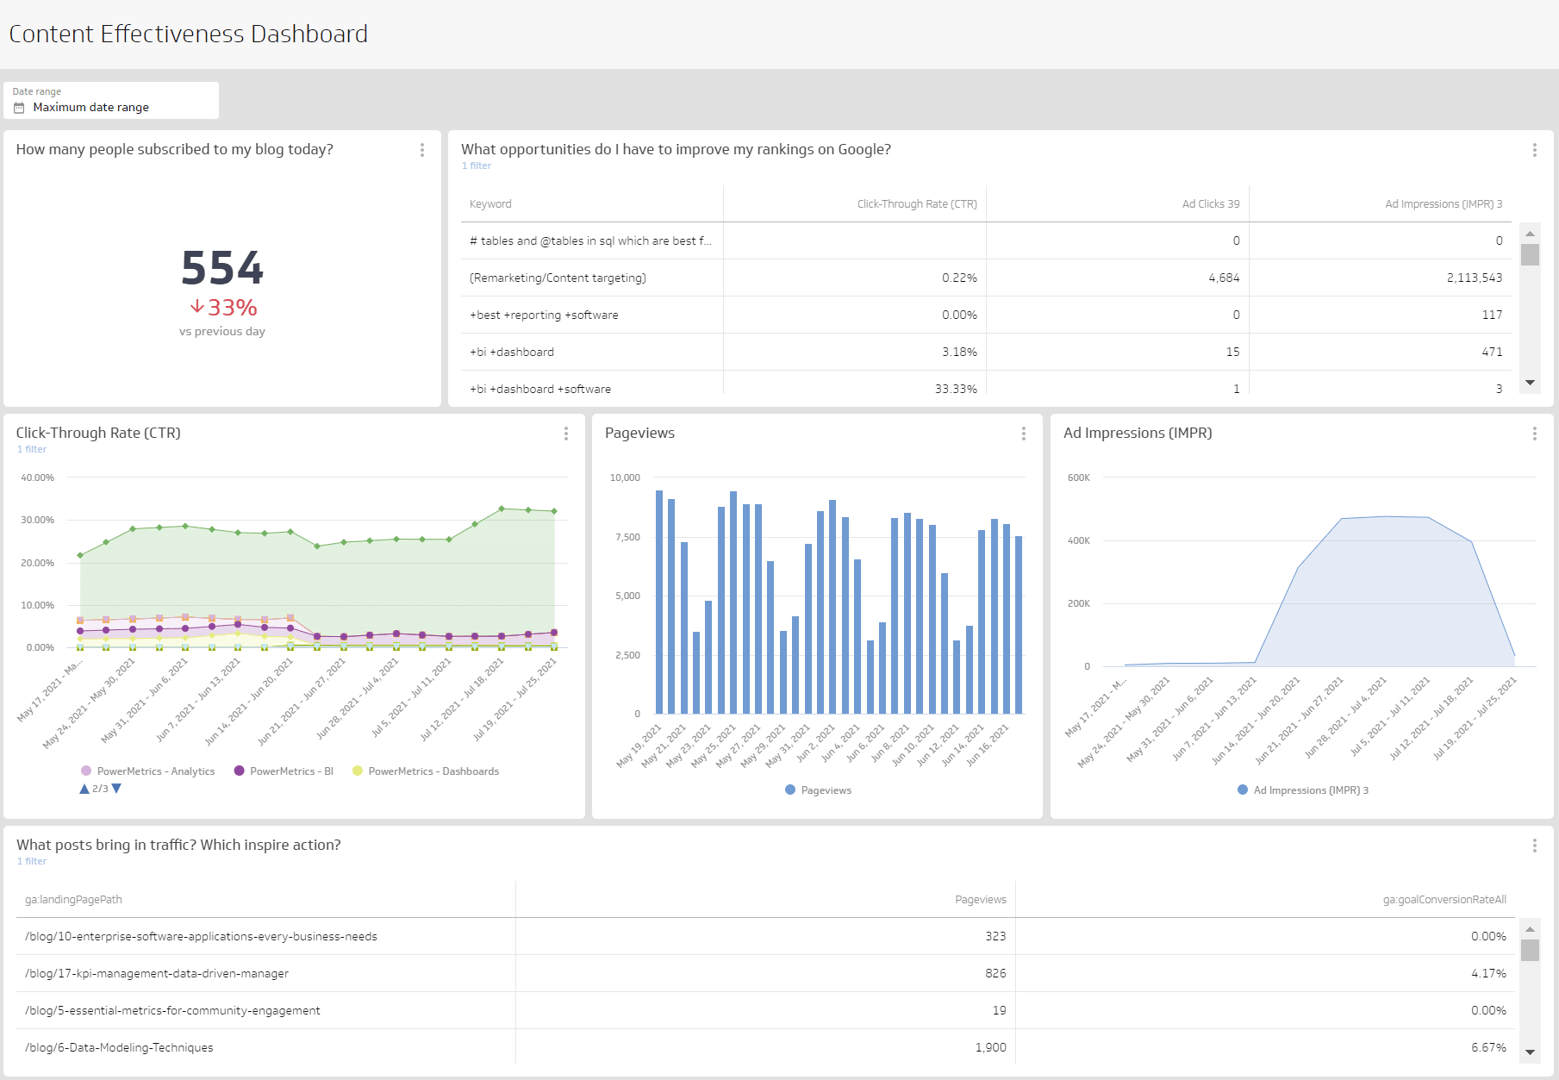 Related Dashboard Examples - Content Effectiveness Dashboard